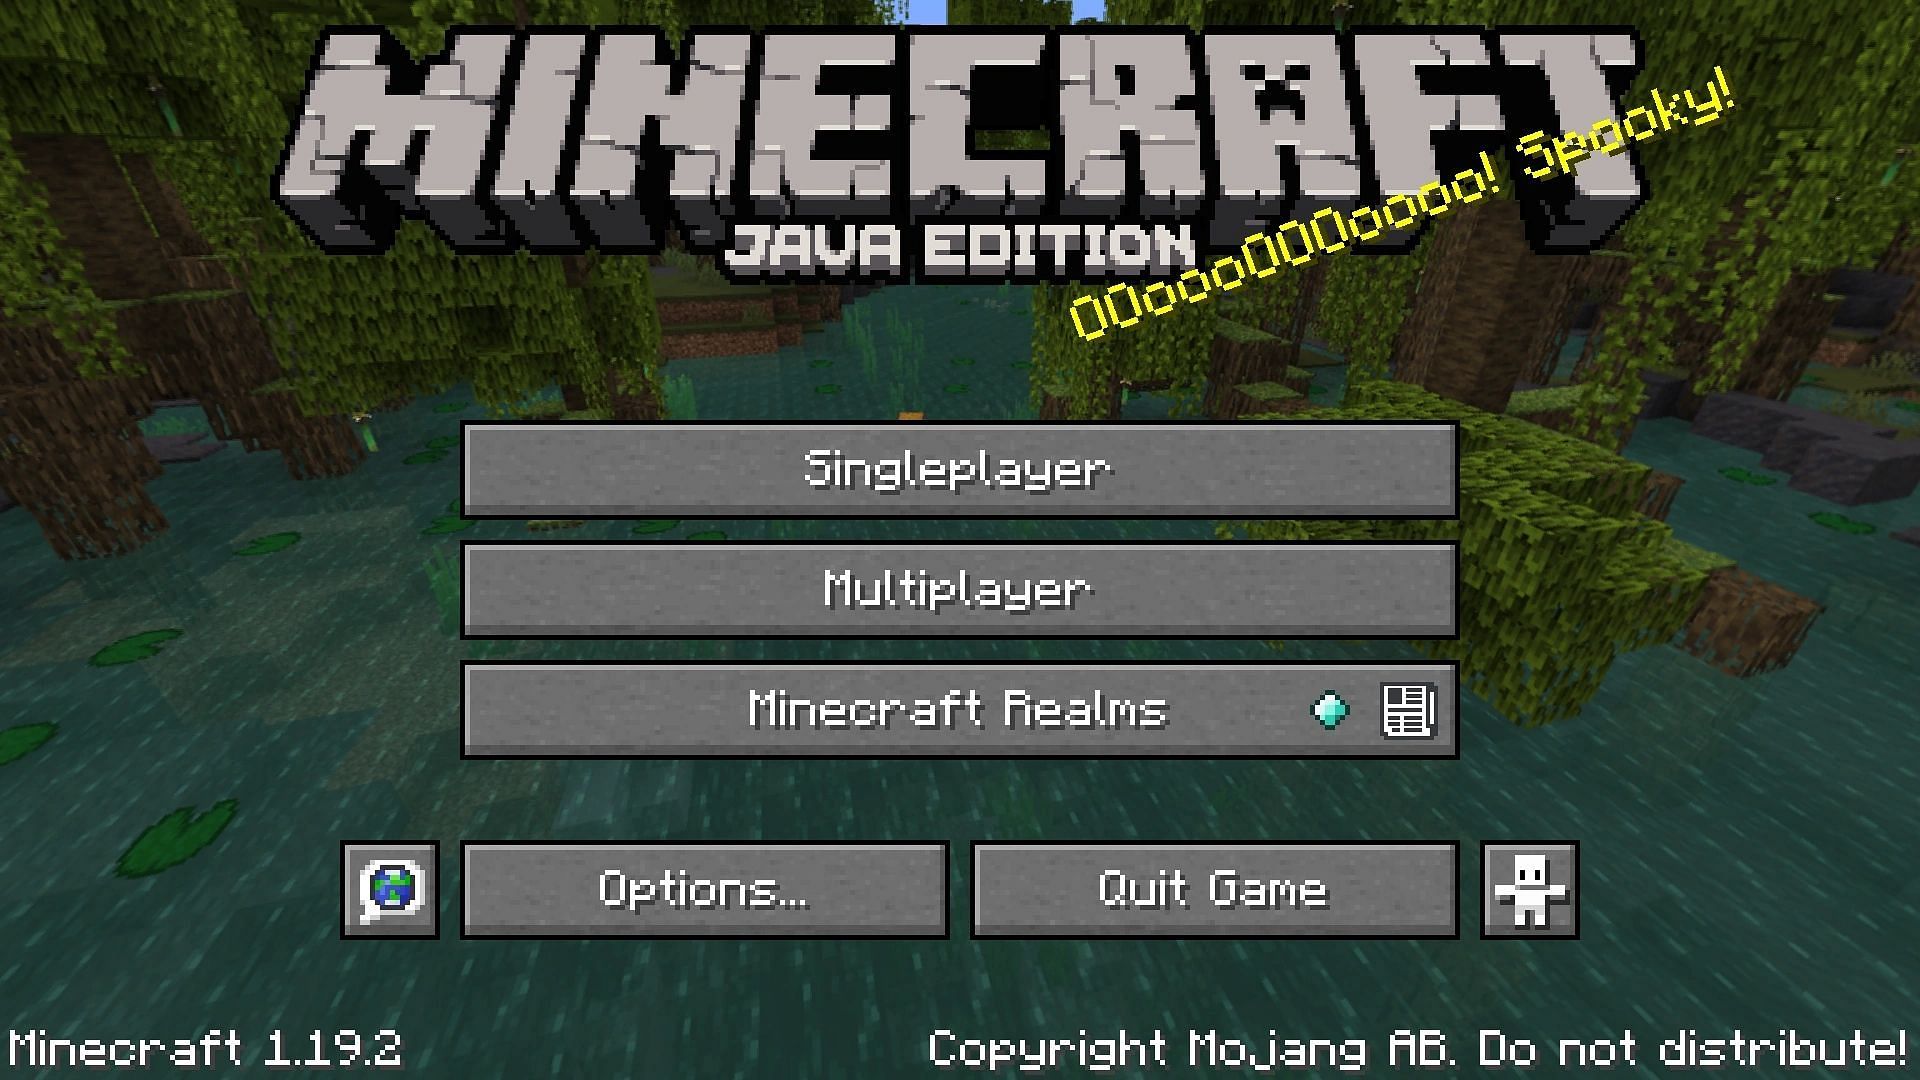 Special text on the splash screen during the Halloween season (Image via Minecraft Wiki)